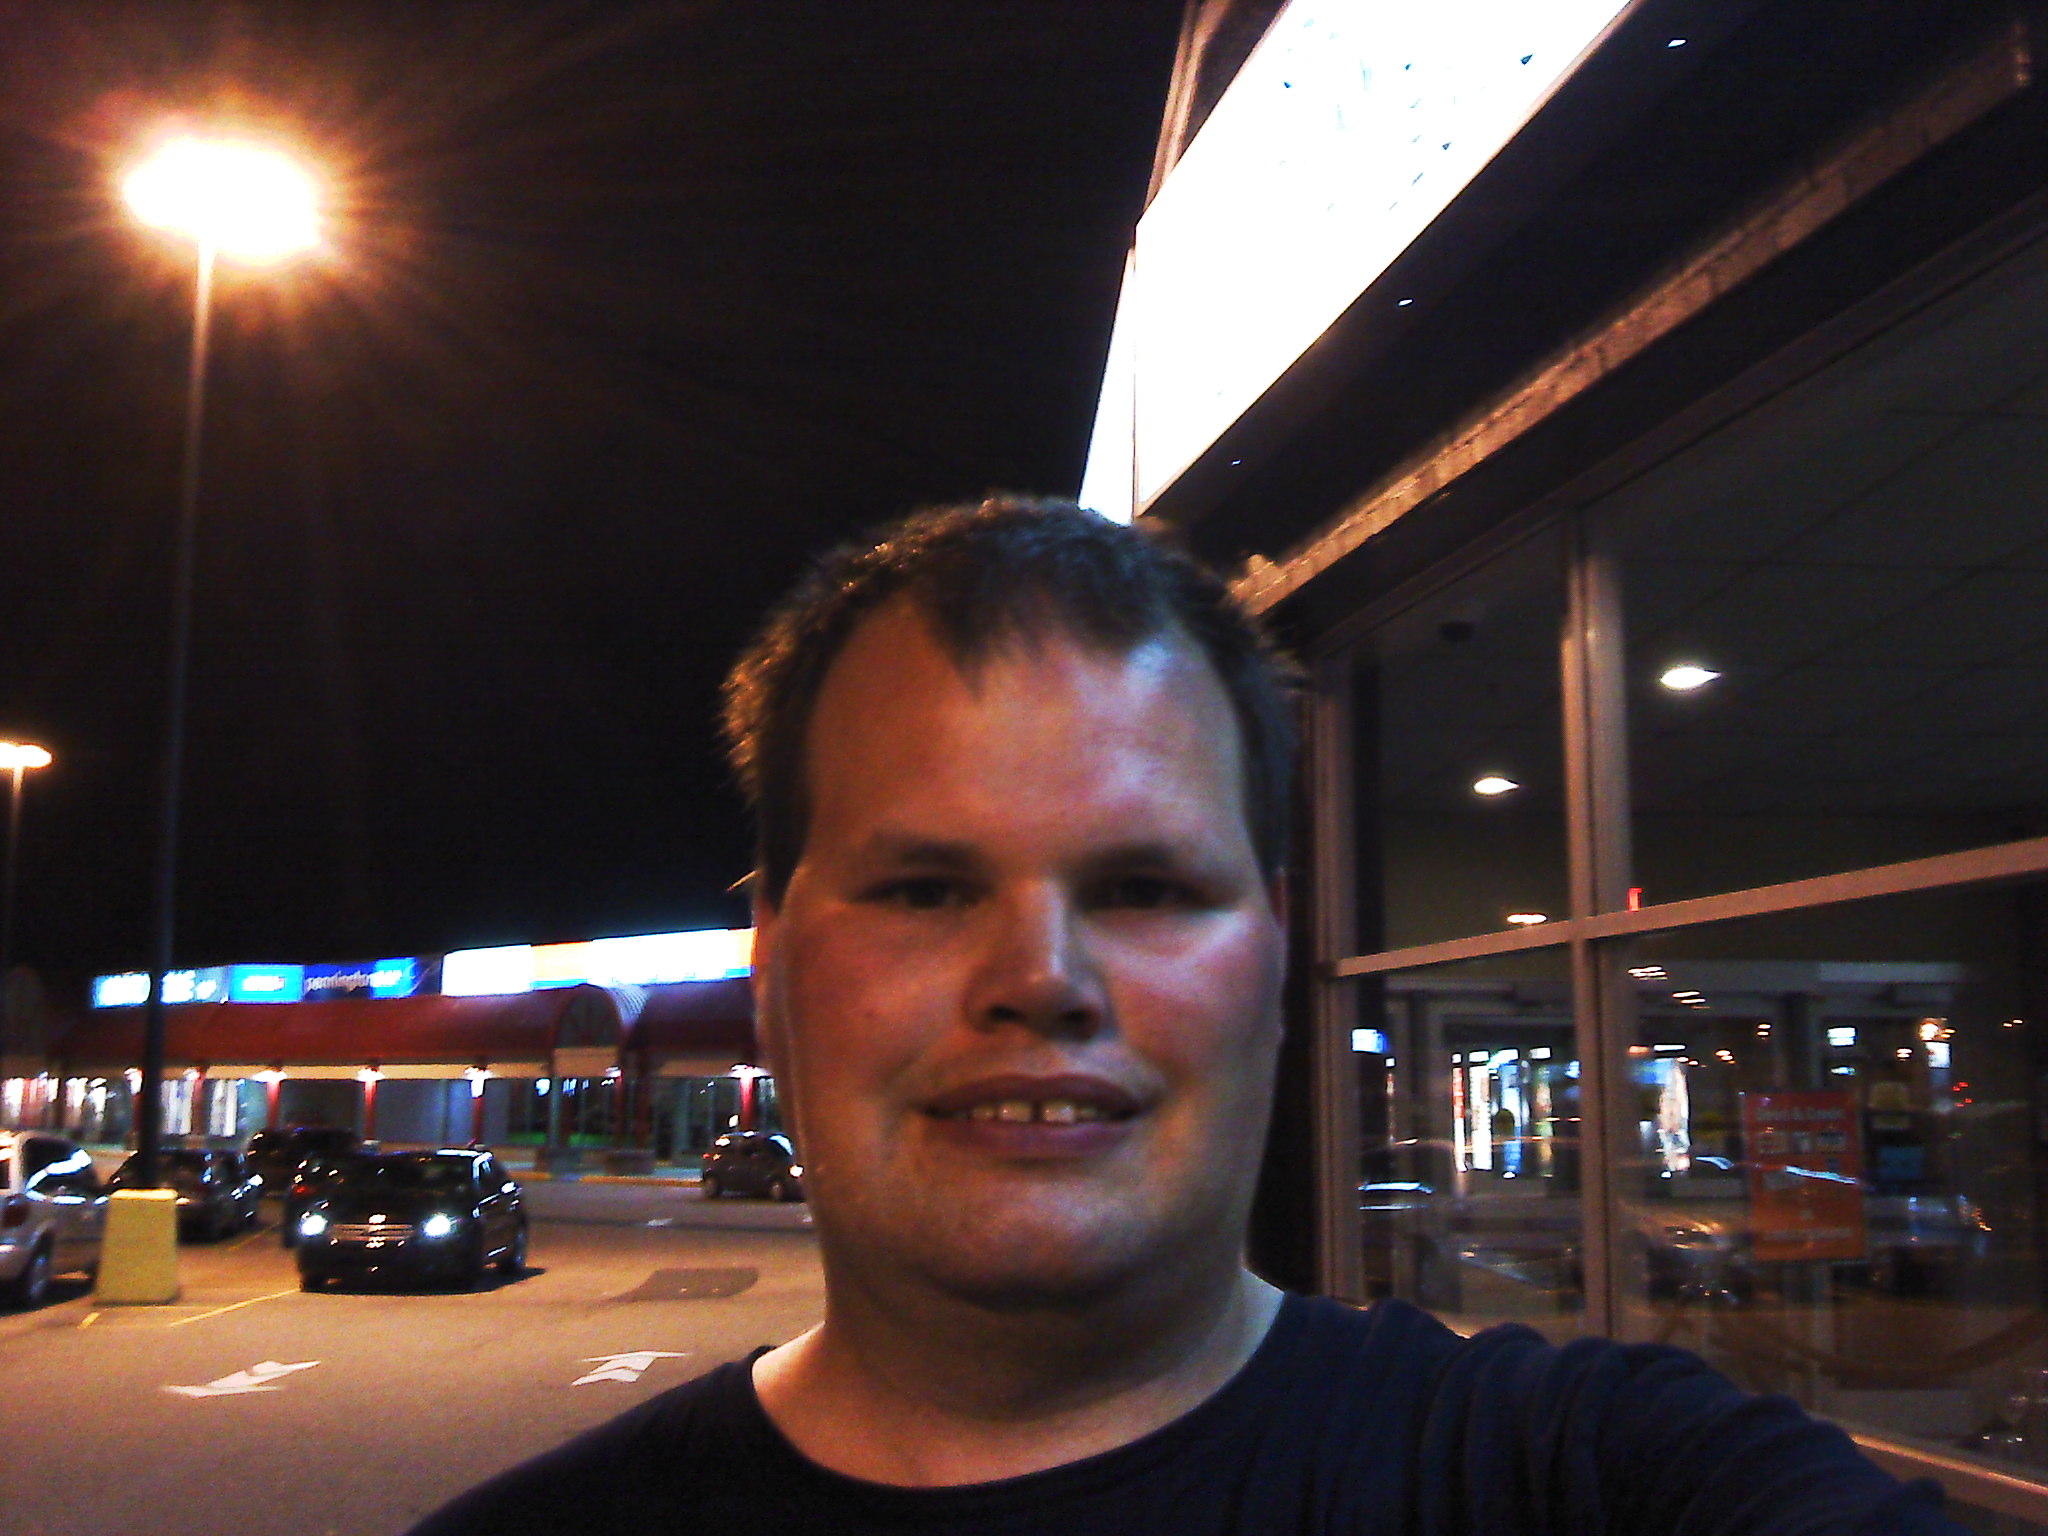 Frankie MacDonald enjoys a walk down on Prince Street up by the Empire Theaters and Frankie is getting some exercise and it was warm but cloudy outside that evening.